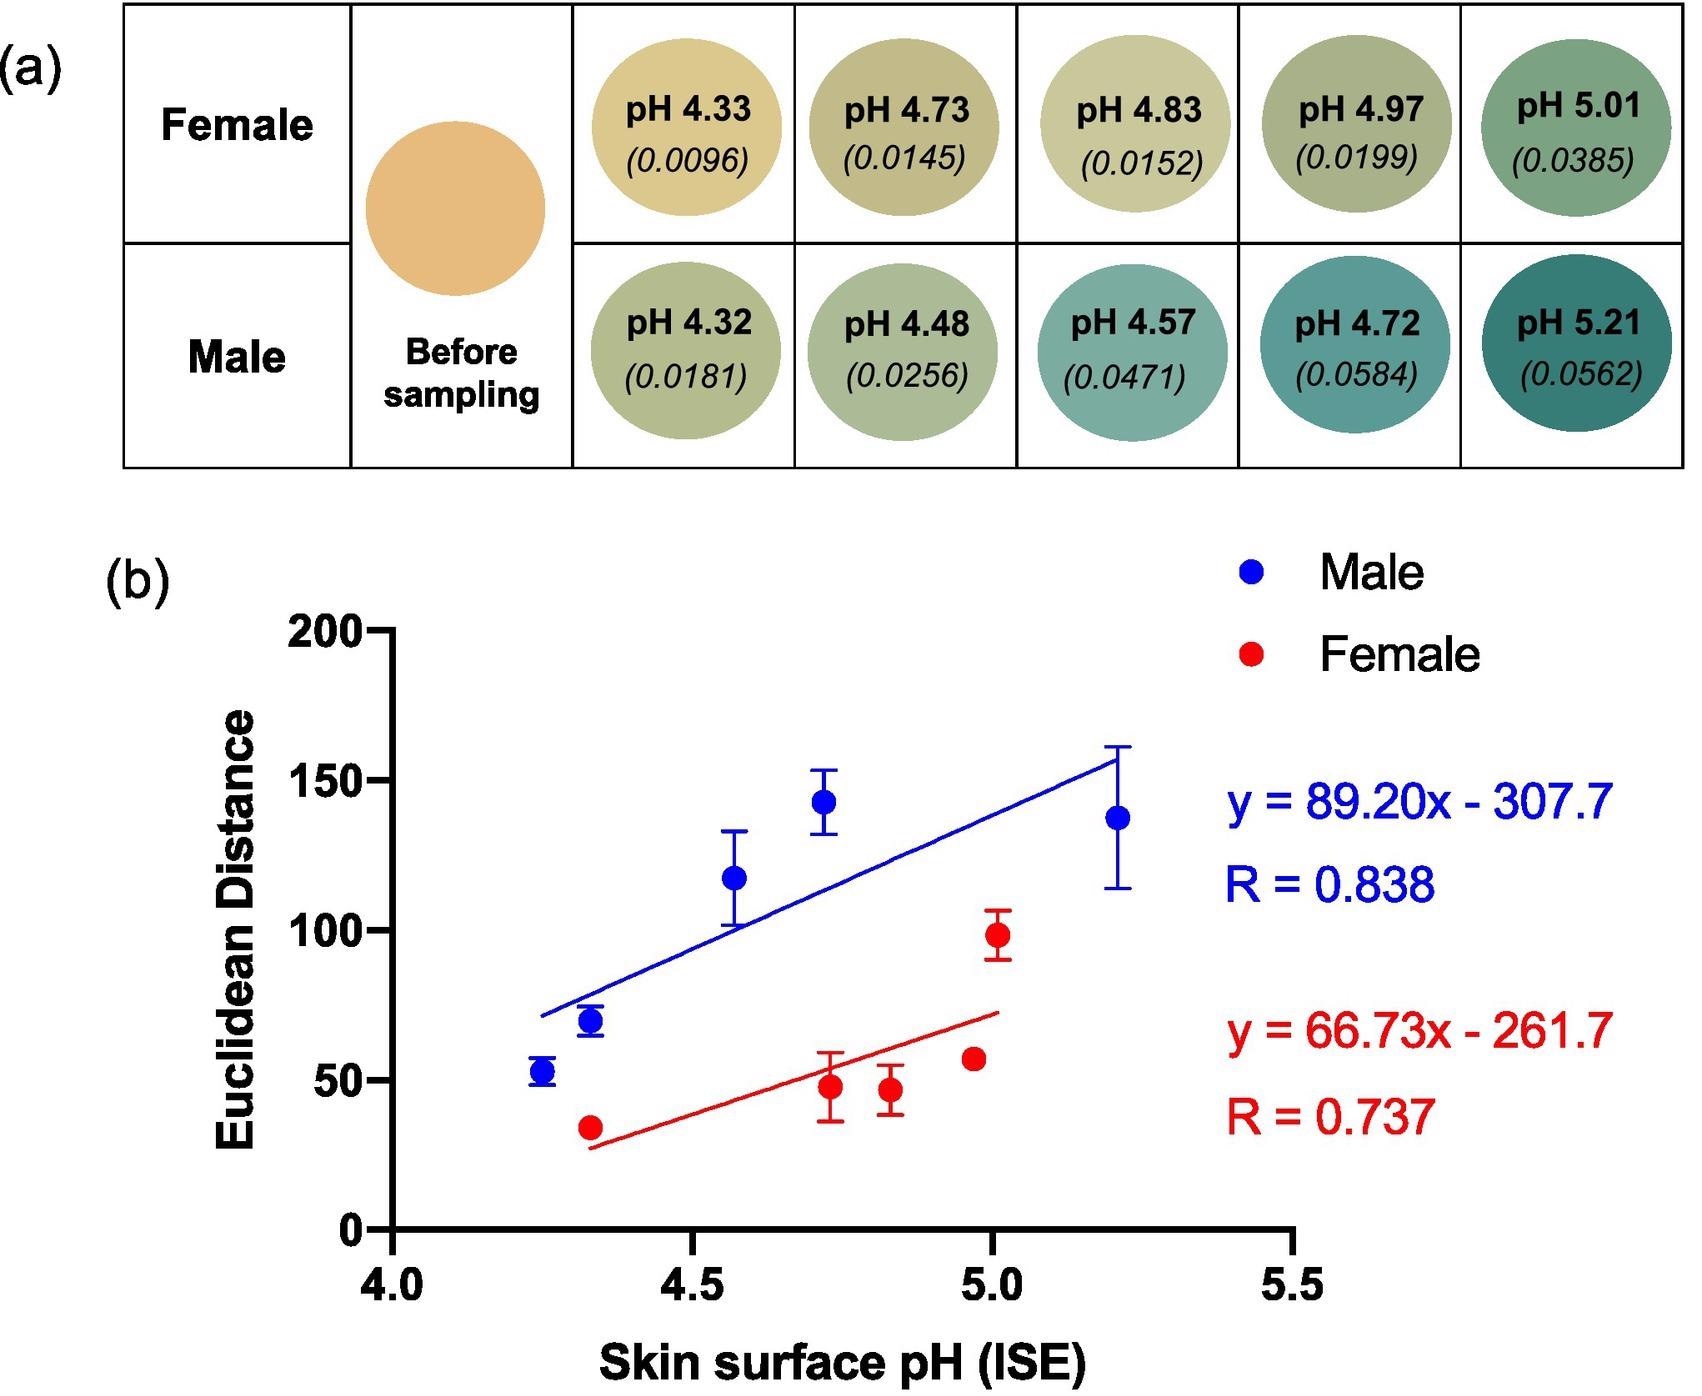 (a) Reproduced average ED color response from wearable platform (6 replicate BCG sensor spots) after being worn on 5 females and 5 males (left palm, 5 h); the corresponding skin surface pHs as measured by a calibrated ISE (bold text) and estimated ammonia flux in mg h-1 cm-2 (italicised text in parenthesis) also given. (b) ED value from (a) plotted as a function of skin surface pH. Error bars represent standard deviation in ED response from n = 6 sensor spots within a single wearable platform. Note: See SI Table 1 for tabulated data.